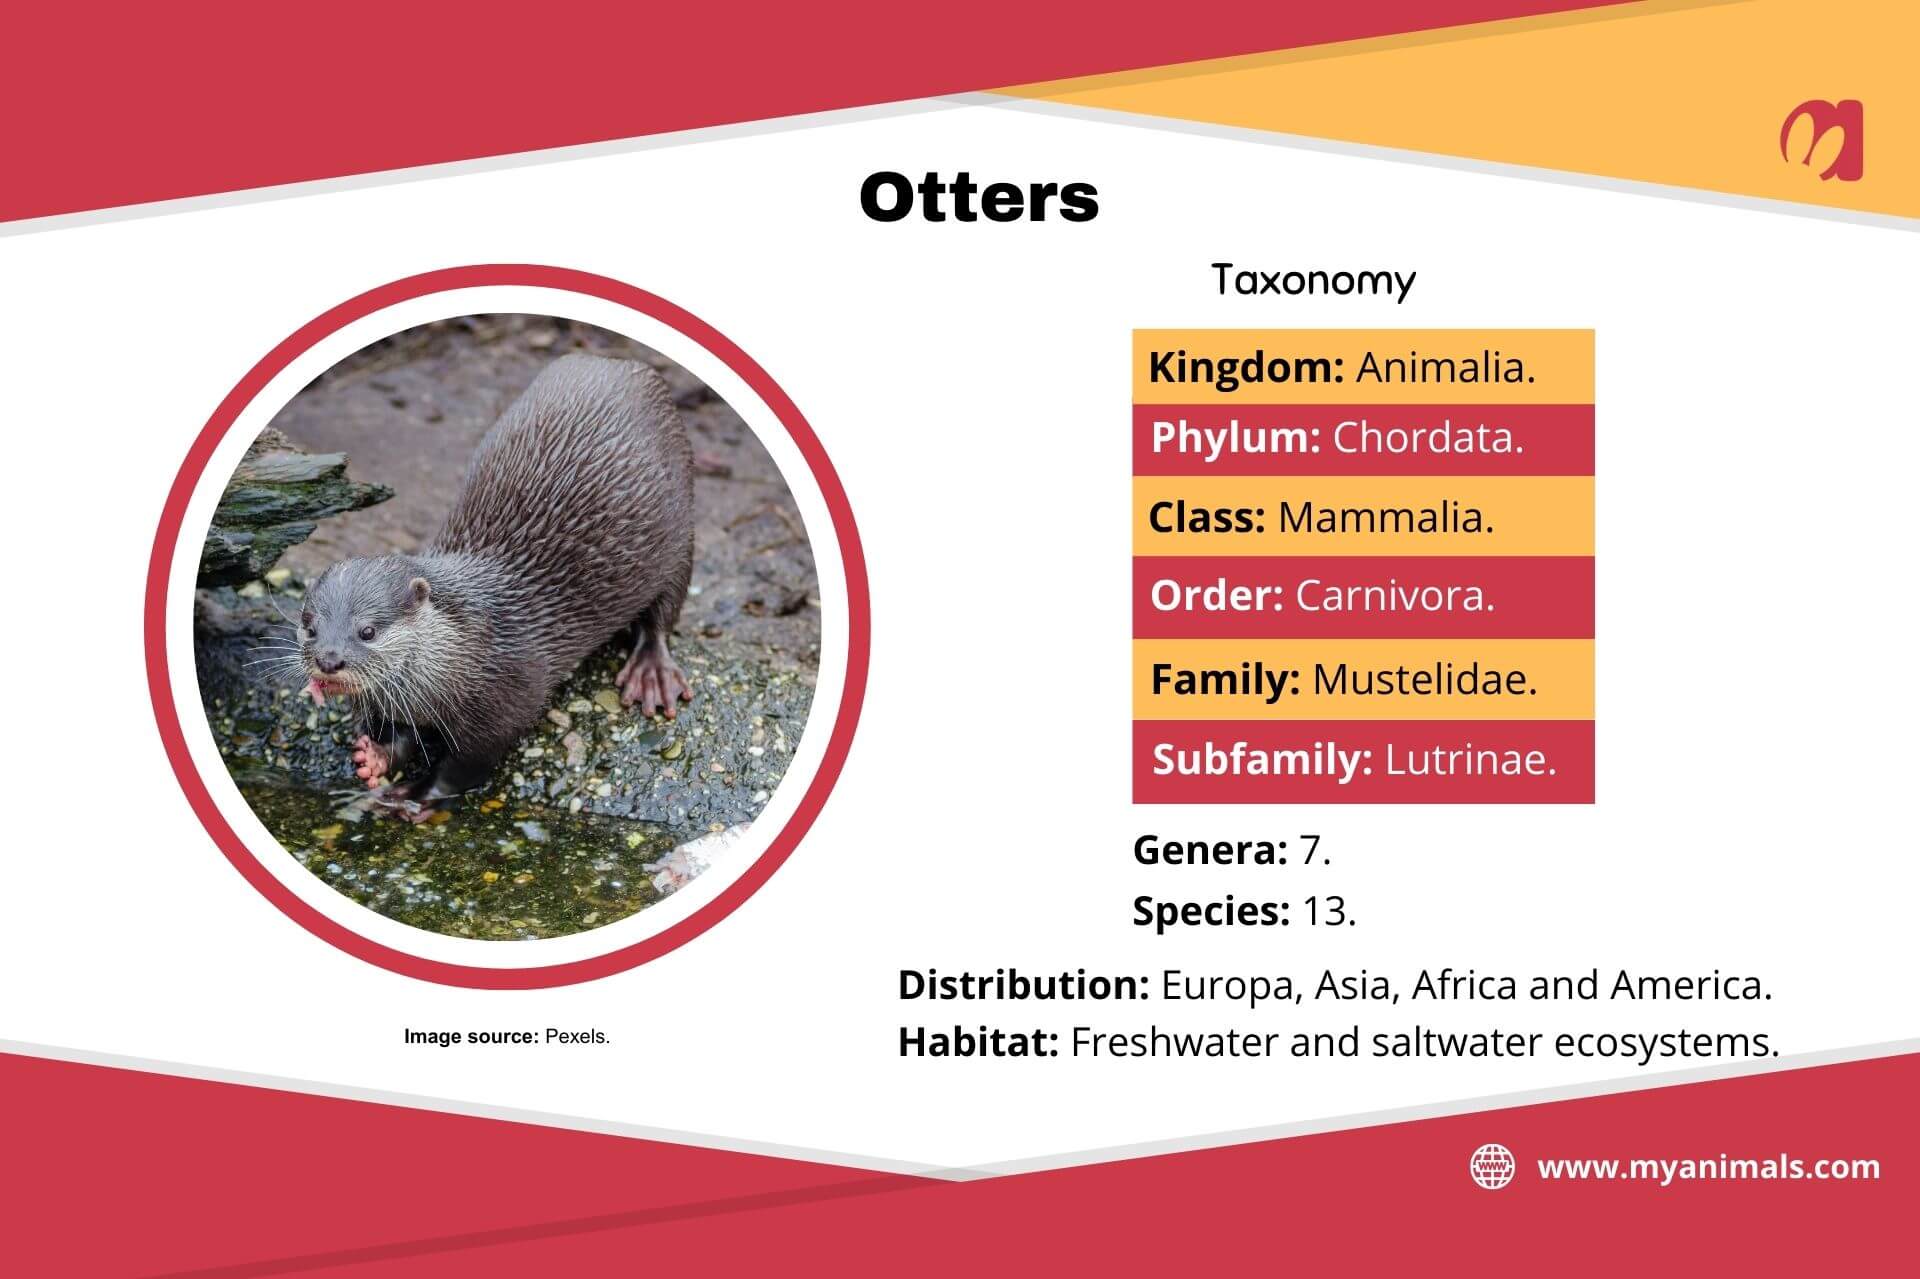 Information on the otter.